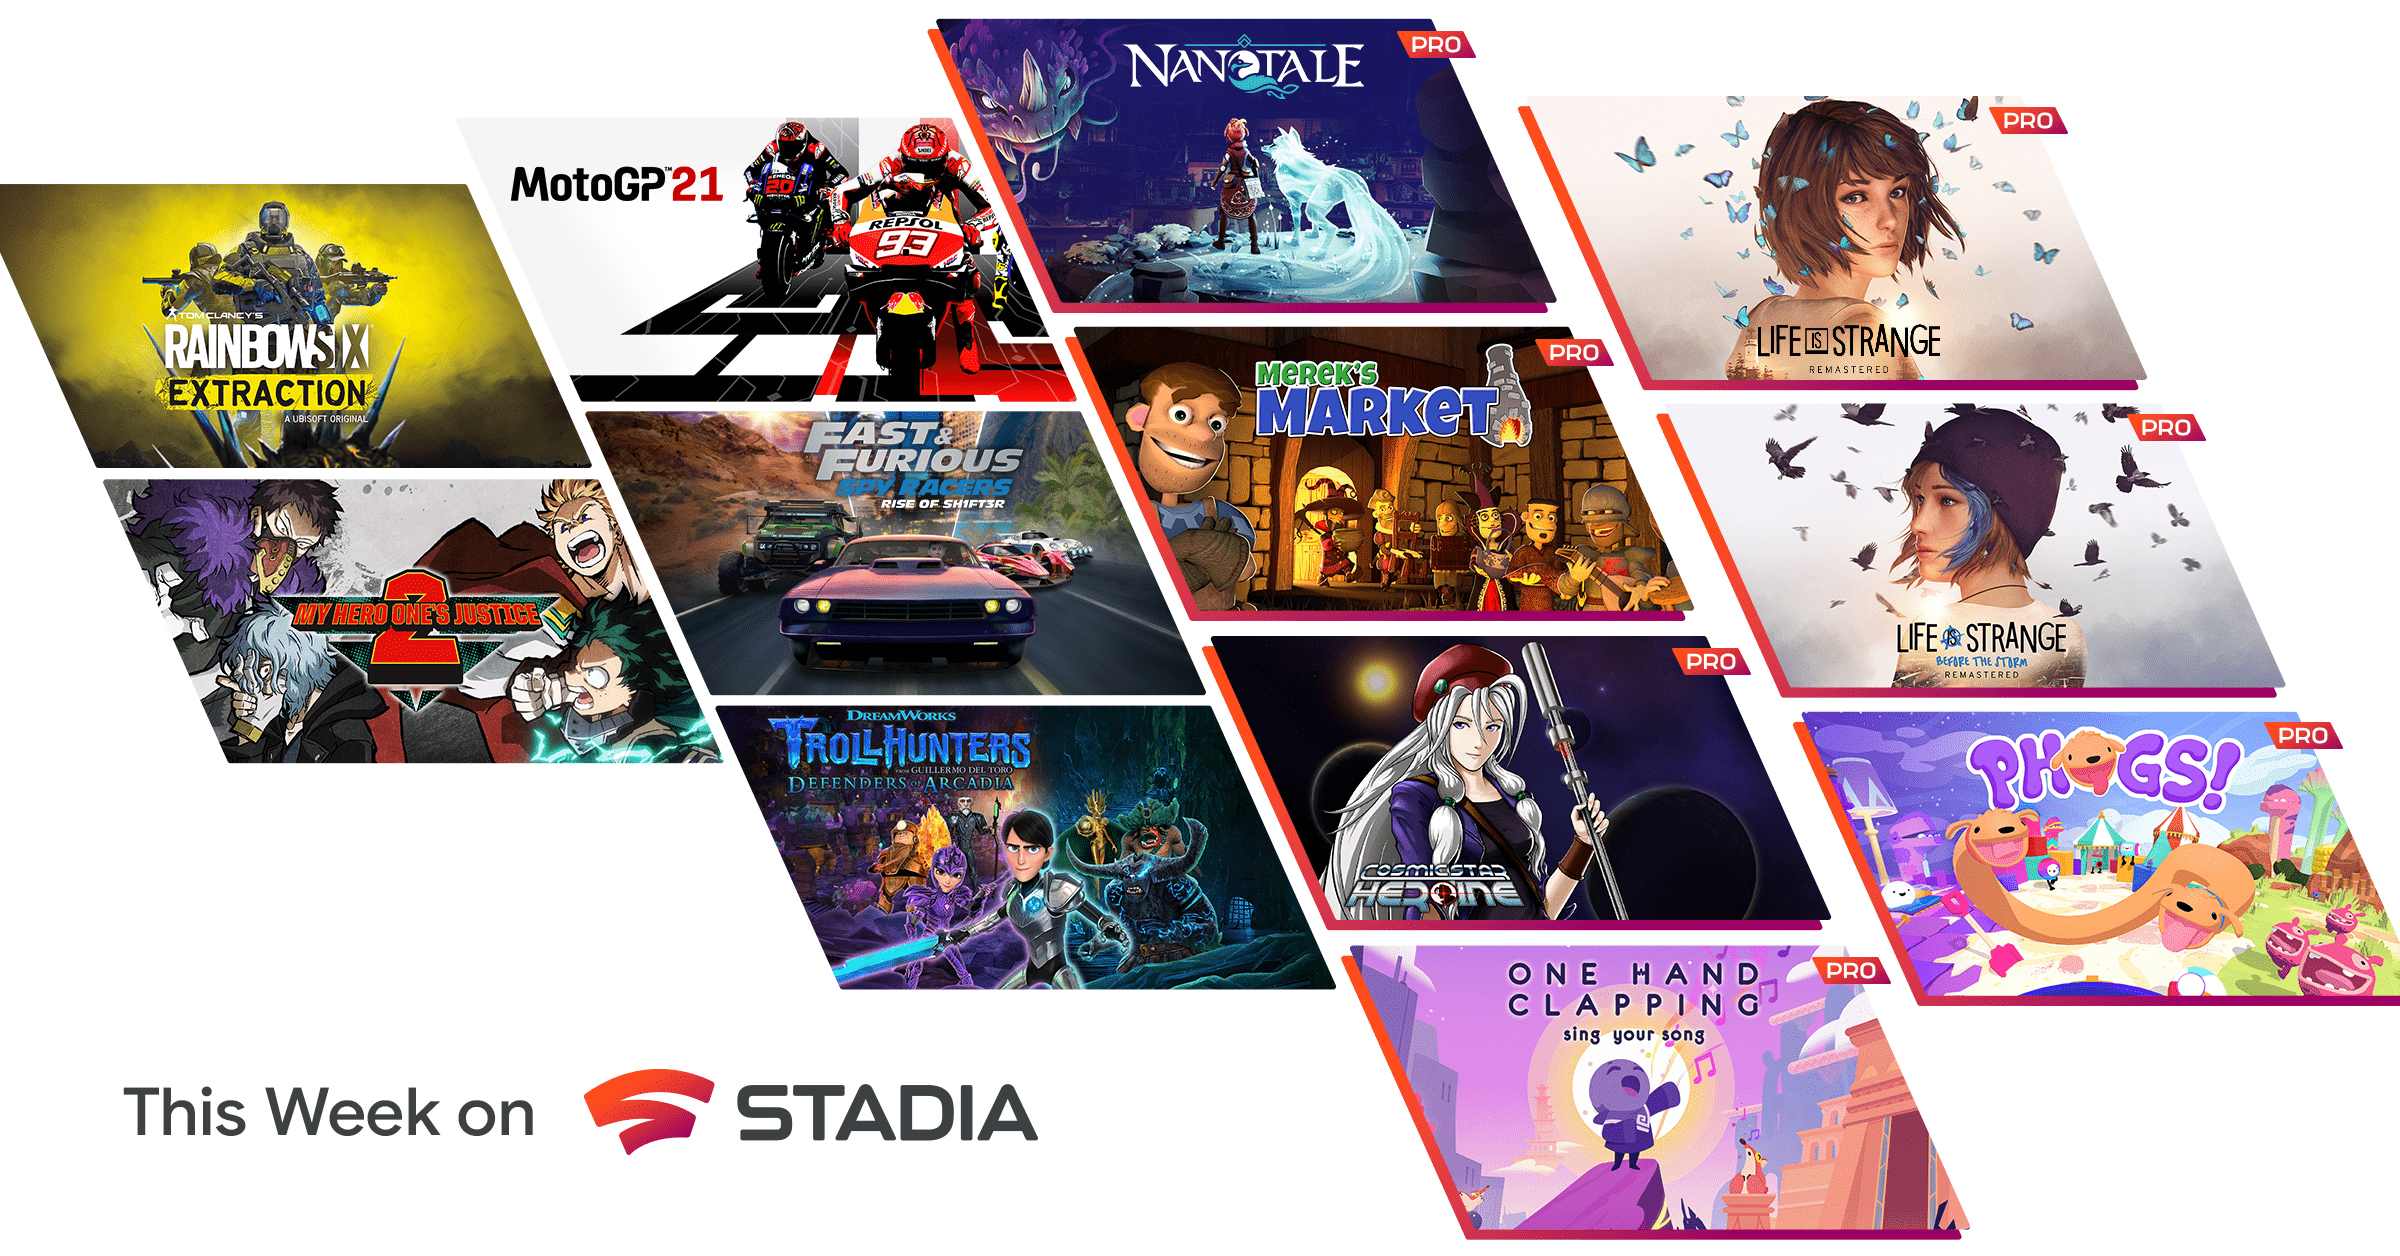 Why Stadia Is Better Than Other Cloud Gaming Platforms, in 5 Points